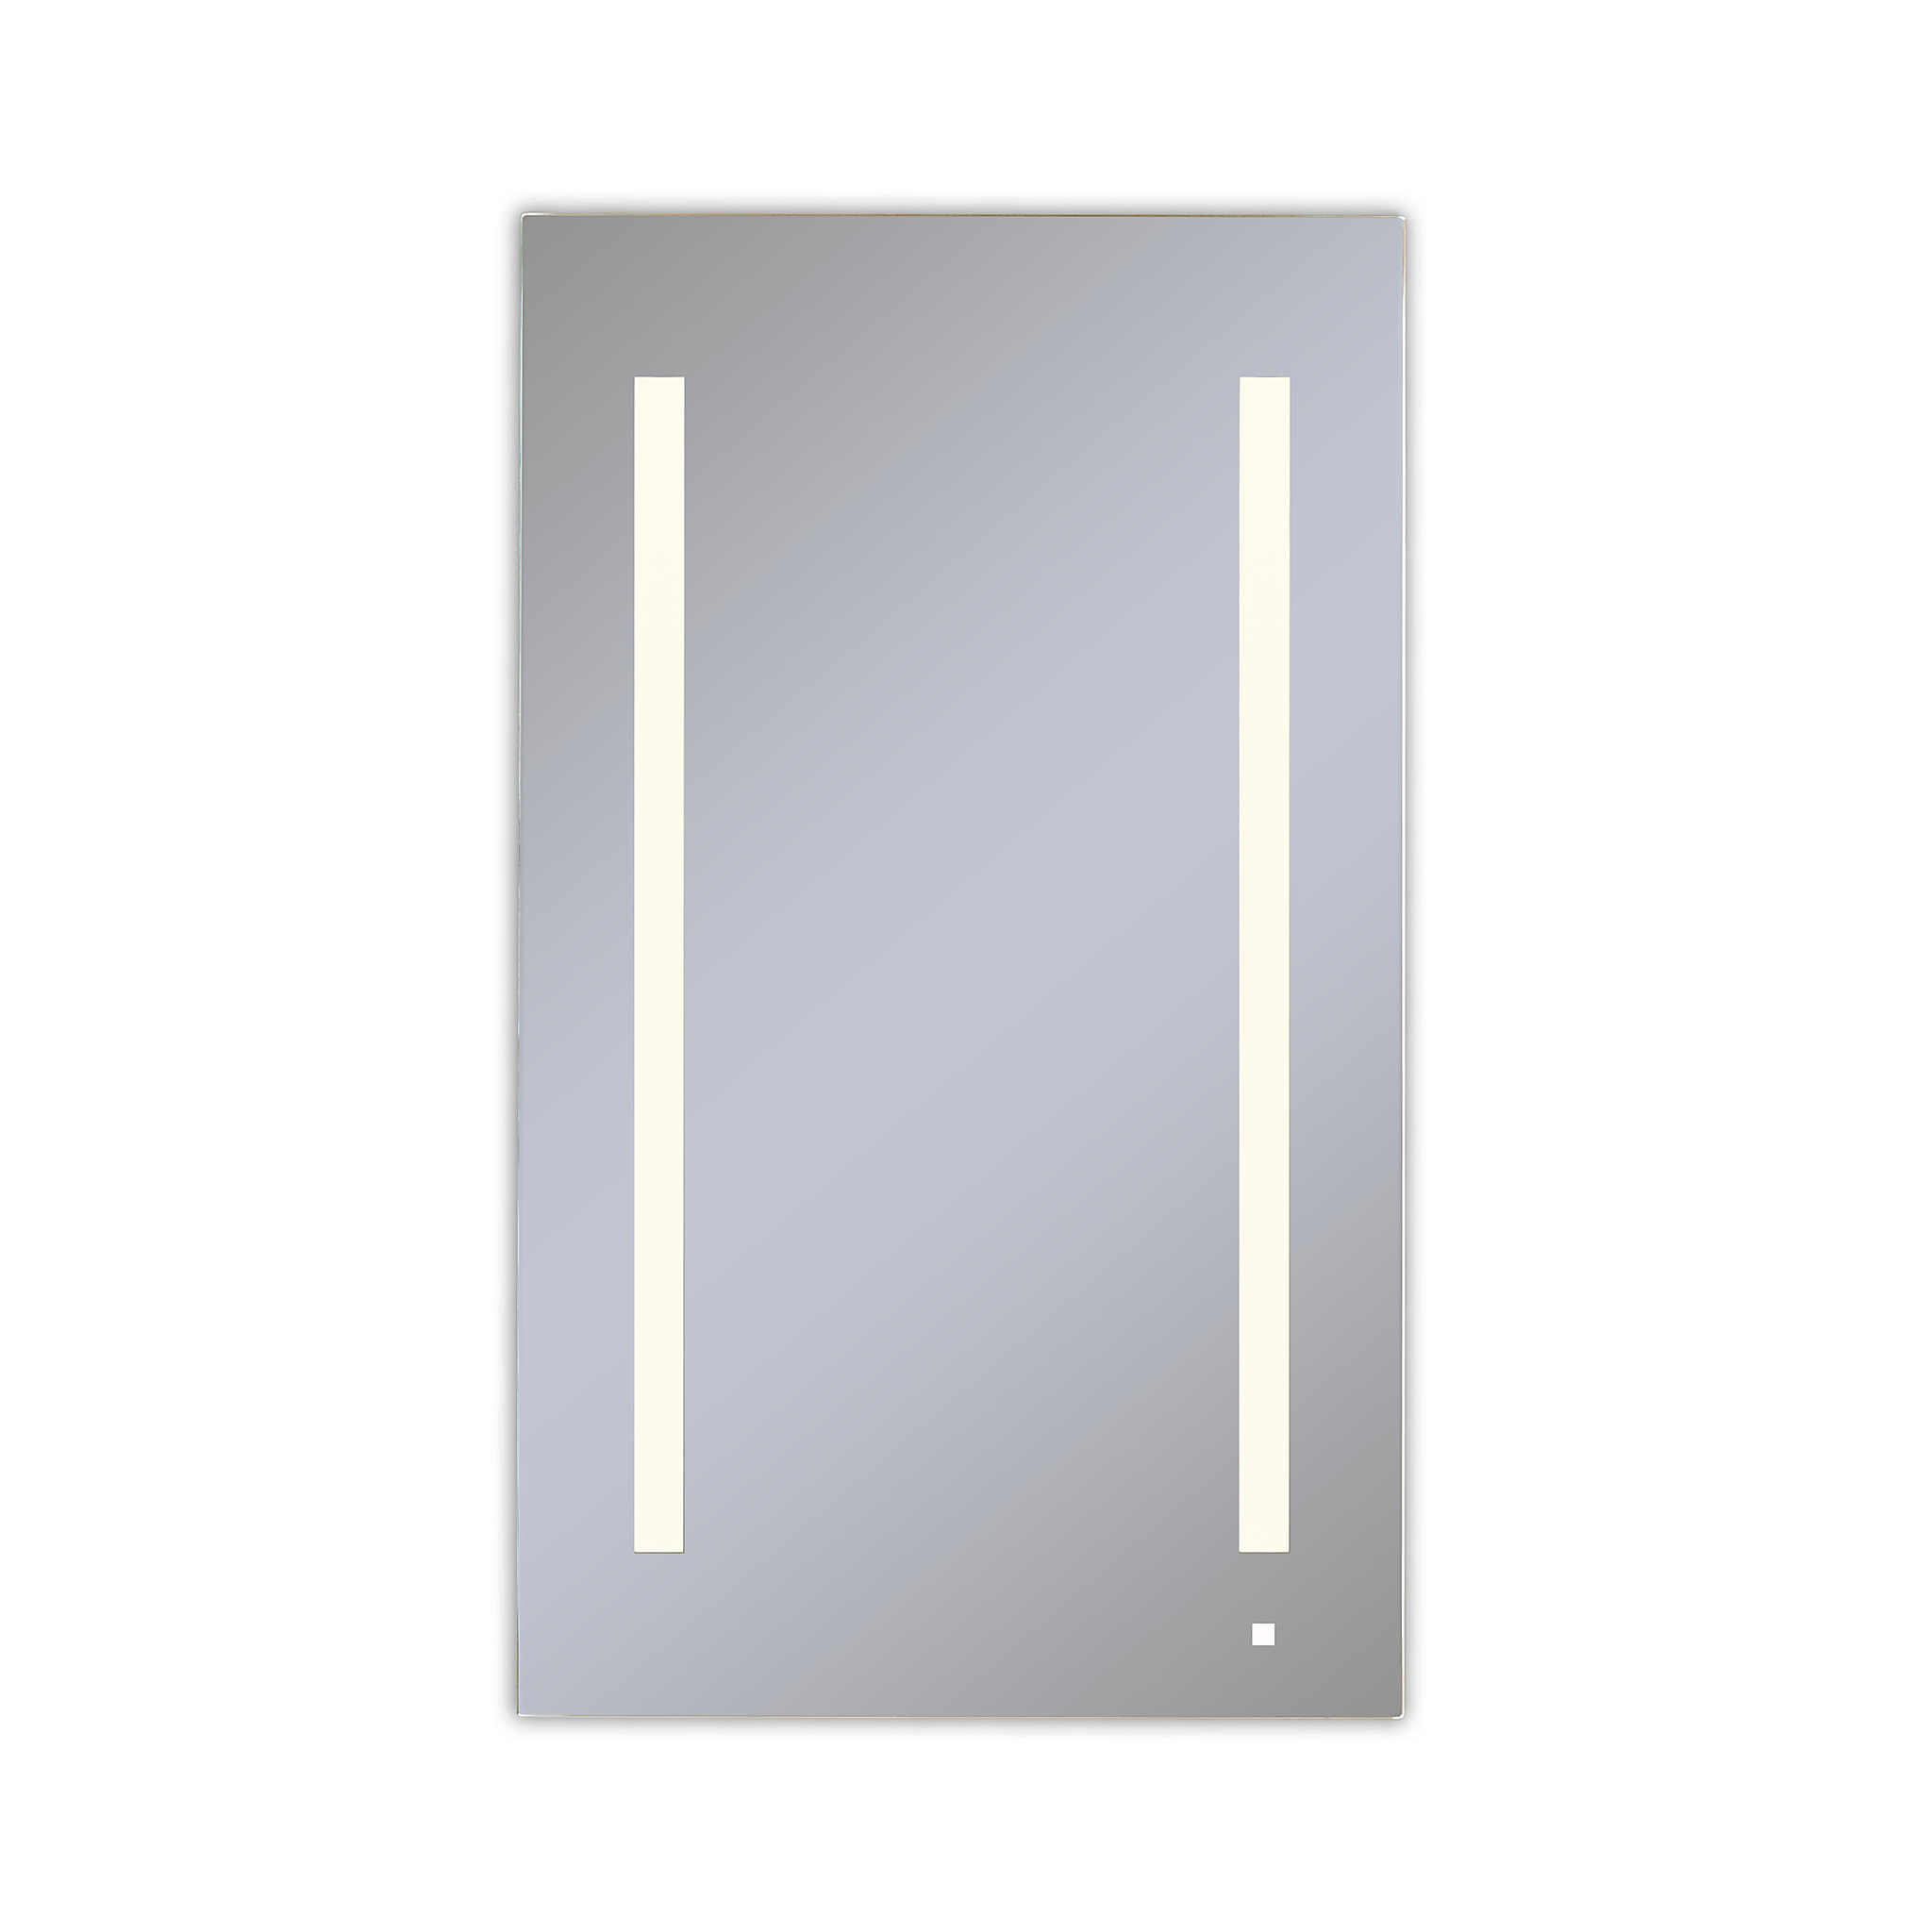 Robern AC2440D4P1LAW AiO Lighted Cabinet, 24" x 40" x 4", LUM Lighting, 2700K Temperature (Warm Light), Dimmable, OM Audio, Elec